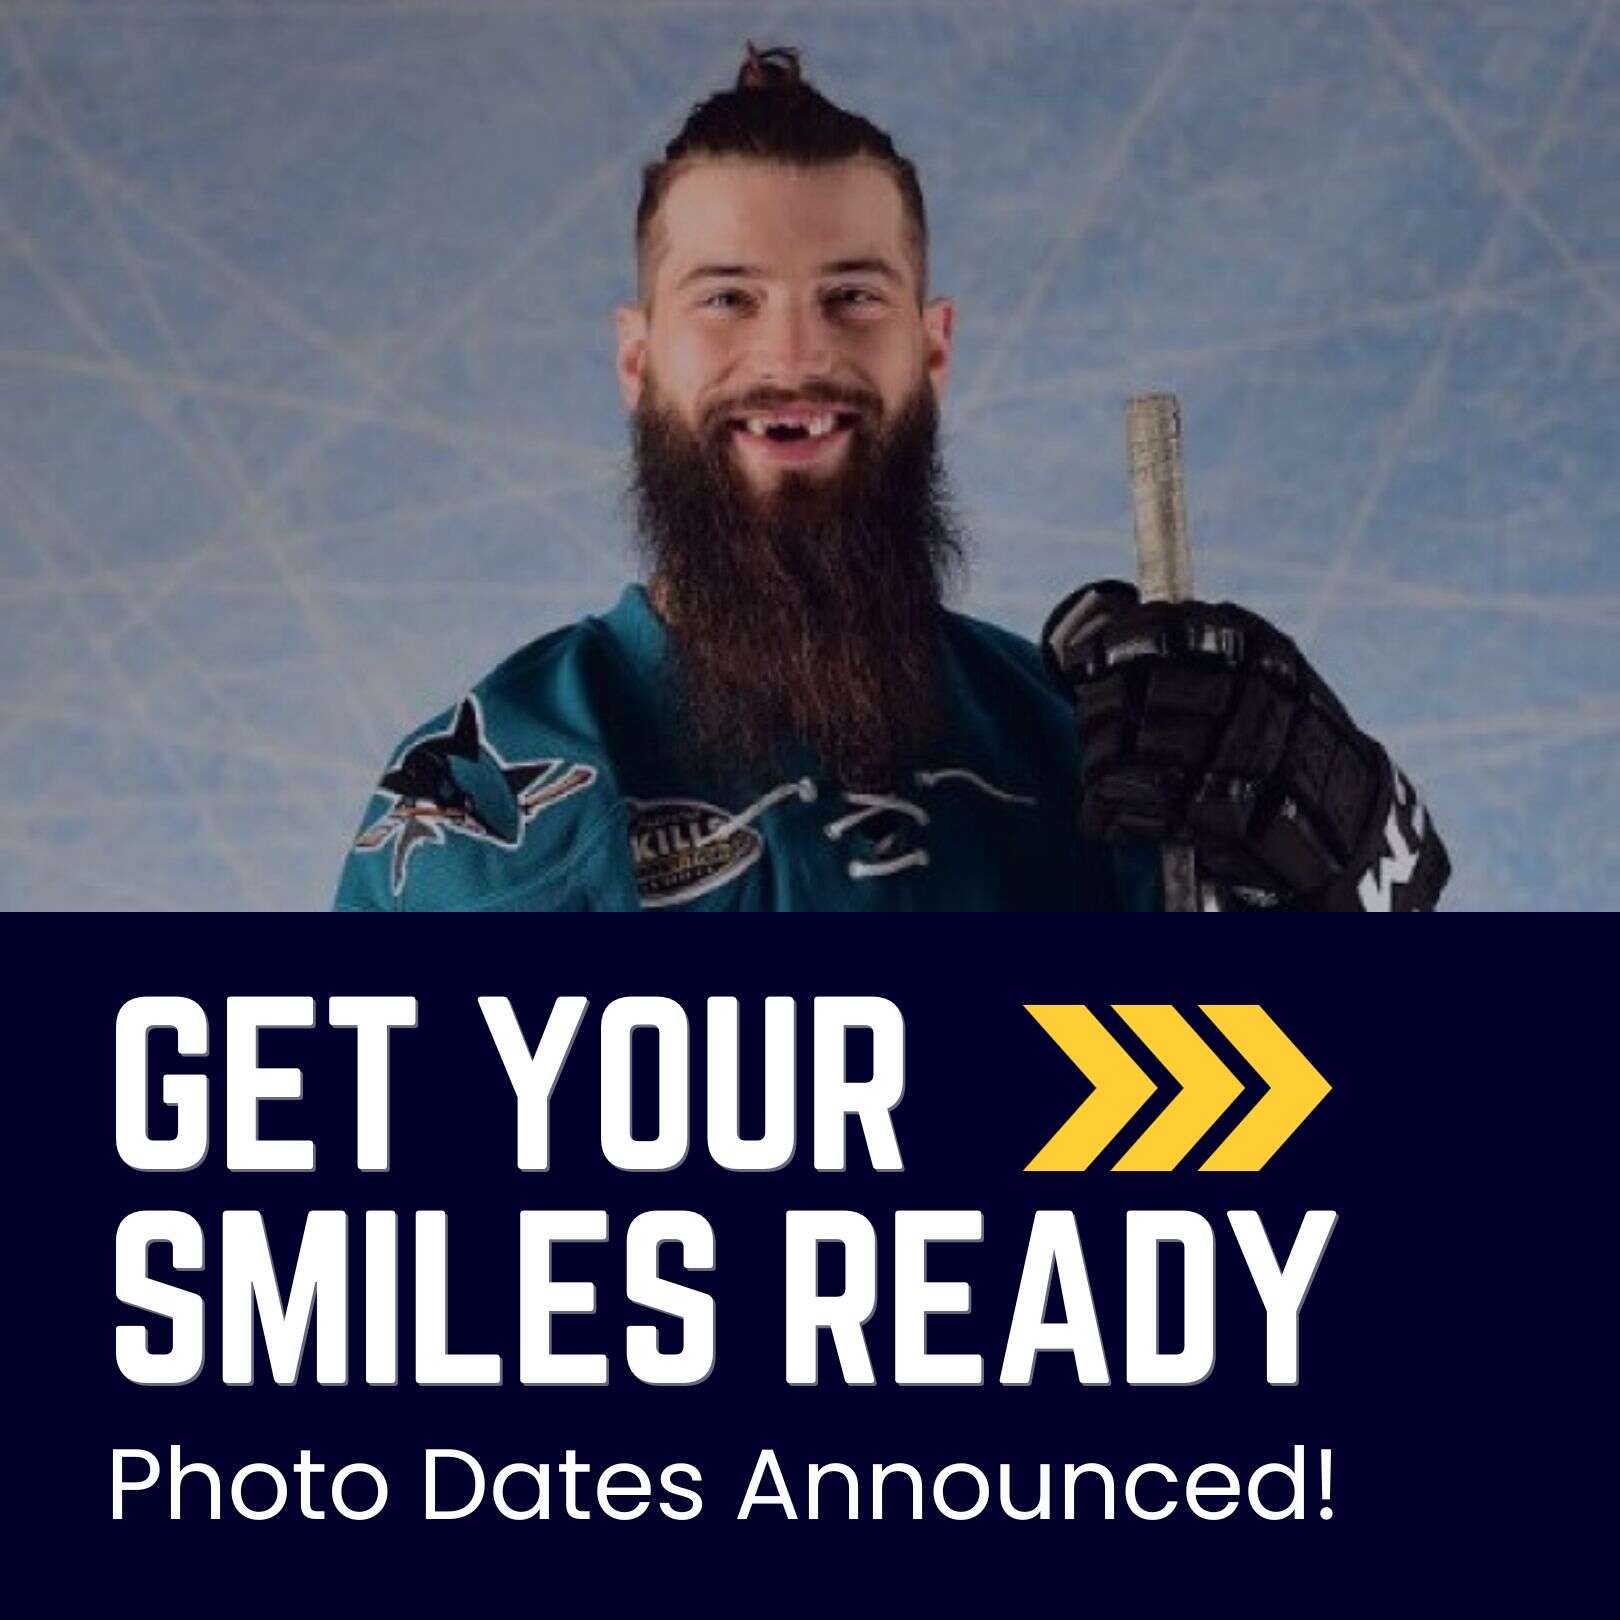 News > GET YOUR SMILES READY Photo Date Announcement (Huntsville Minor